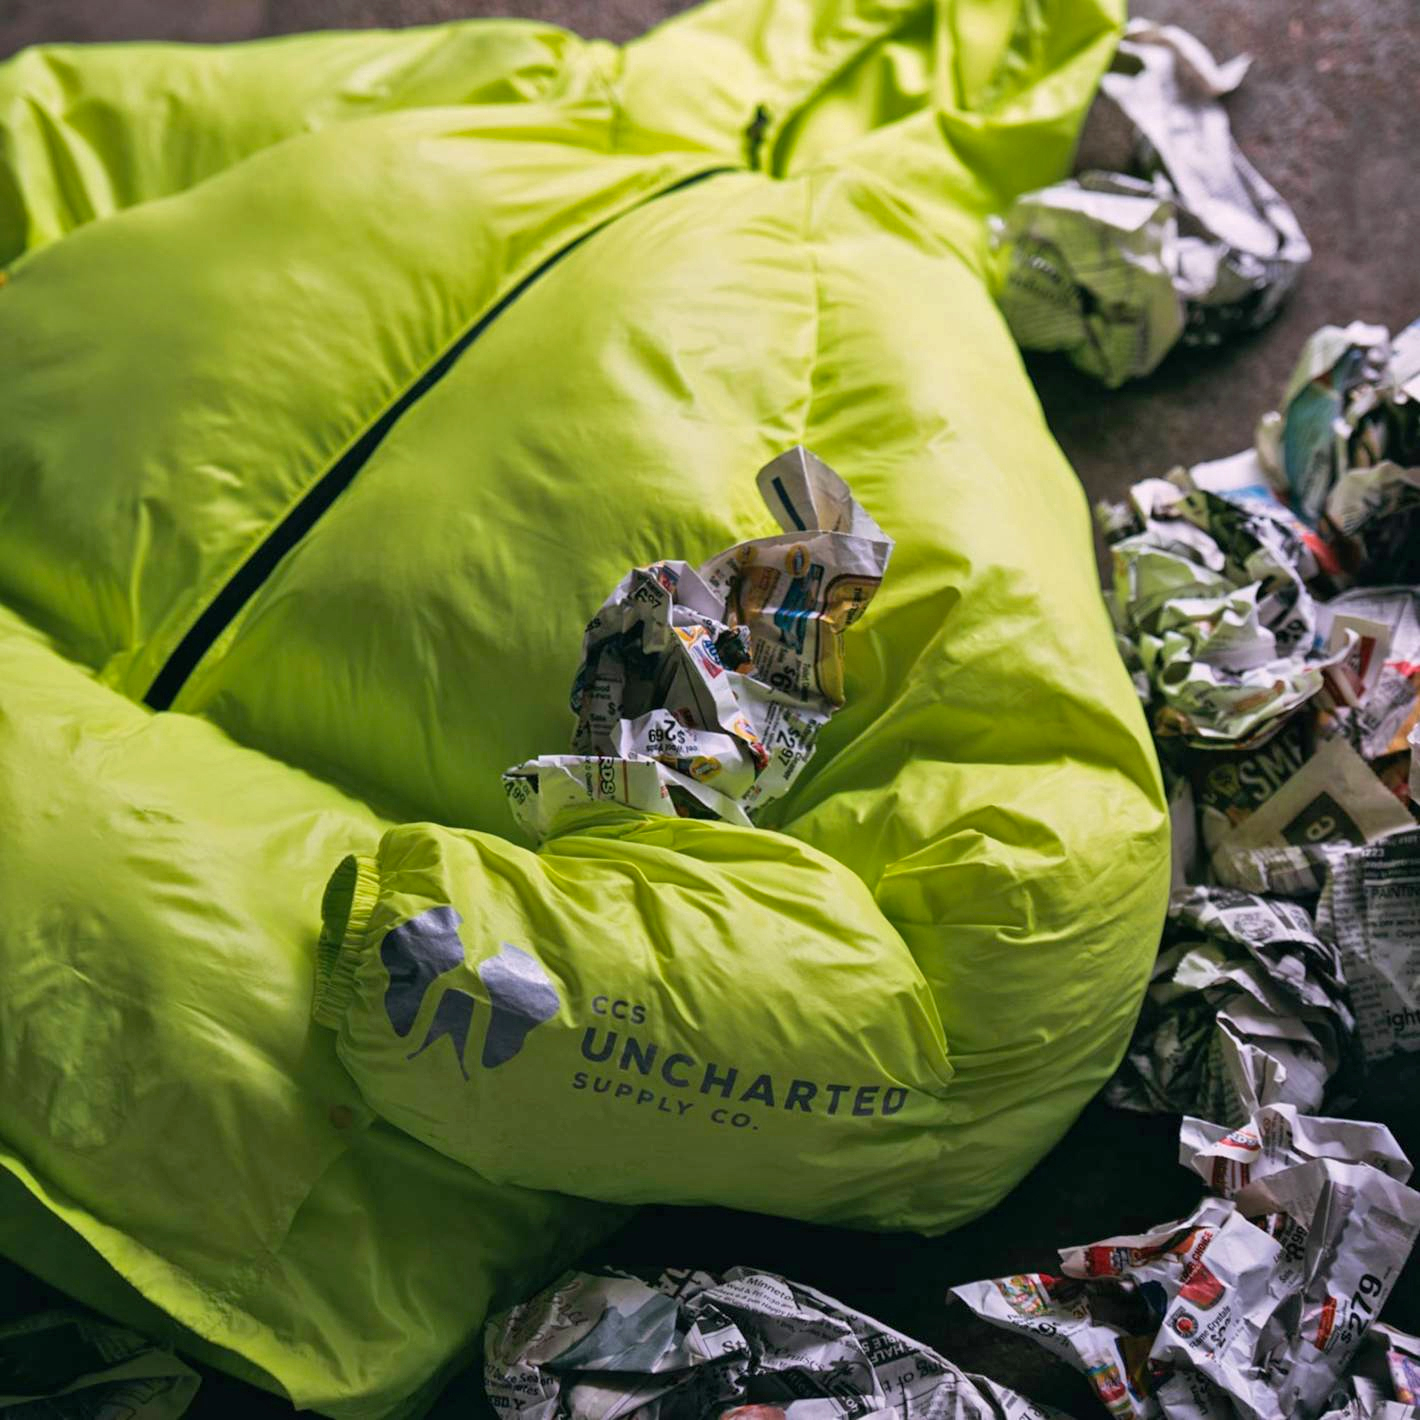 Stuff This Windbreaker With Leaves Or Newspapers And It Becomes A Warm Emergency Parka